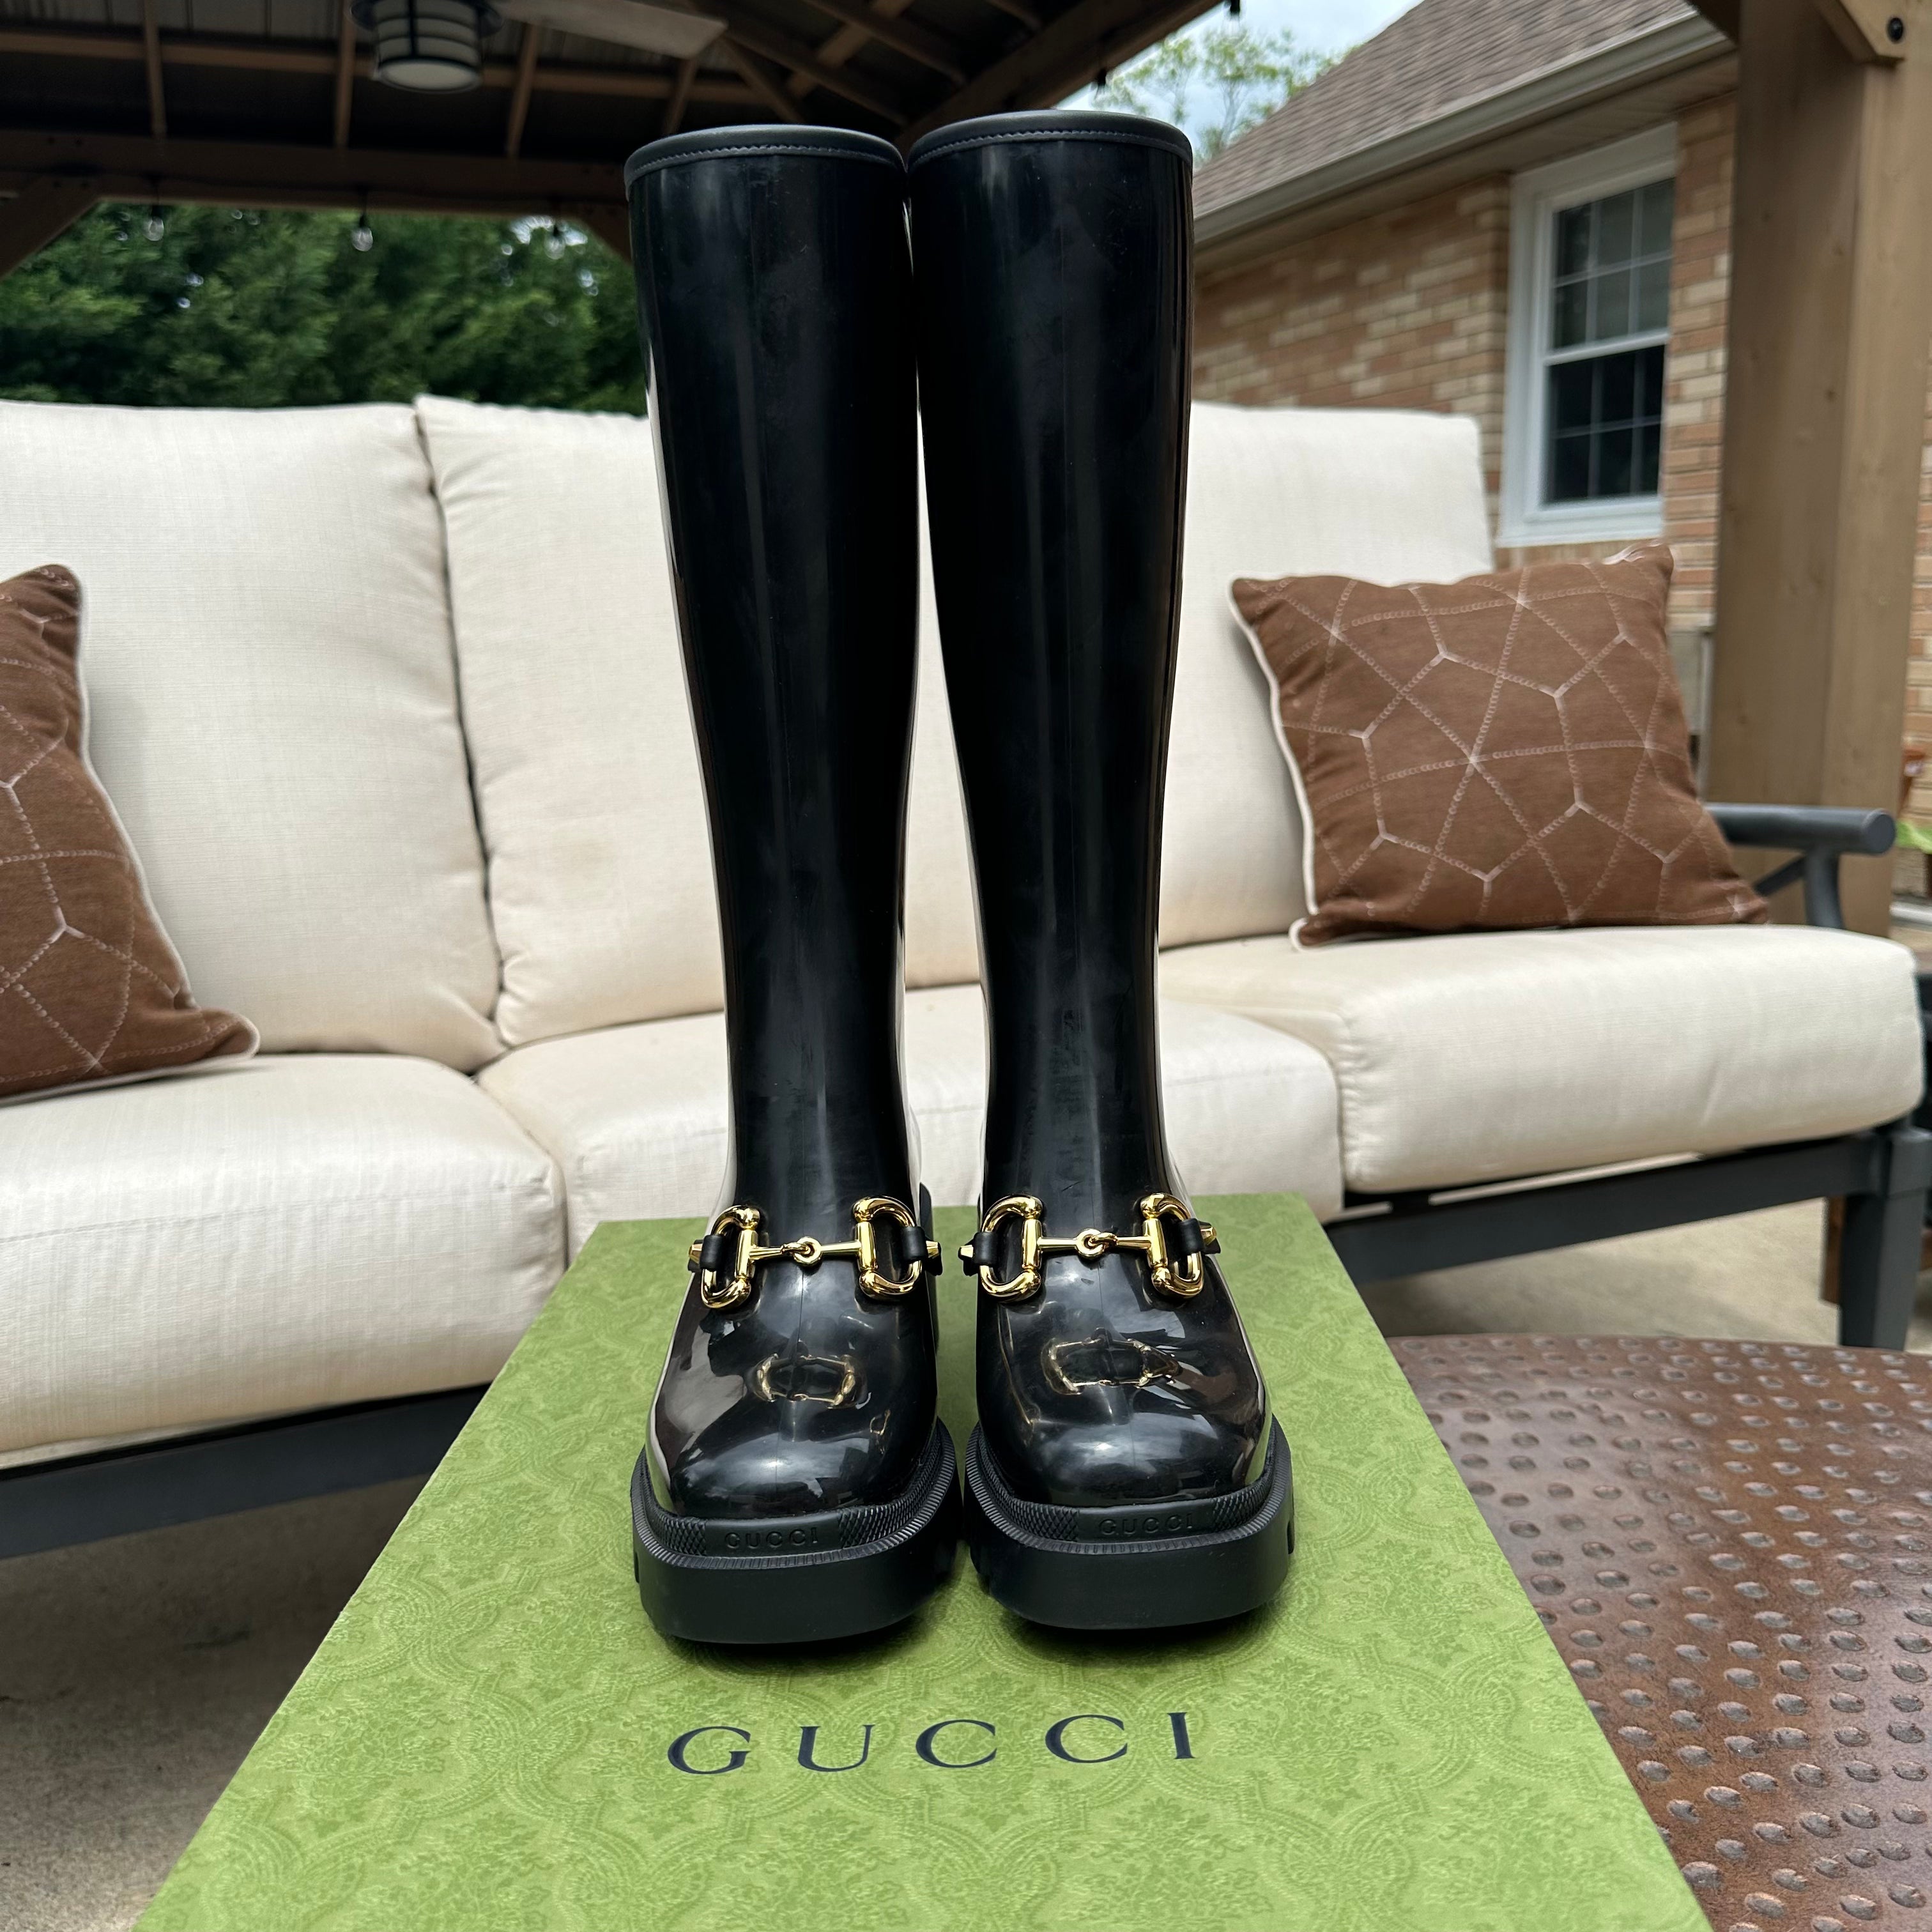 Gucci, Shoes, Gucci Leather Boots Authentic Vintage Italy